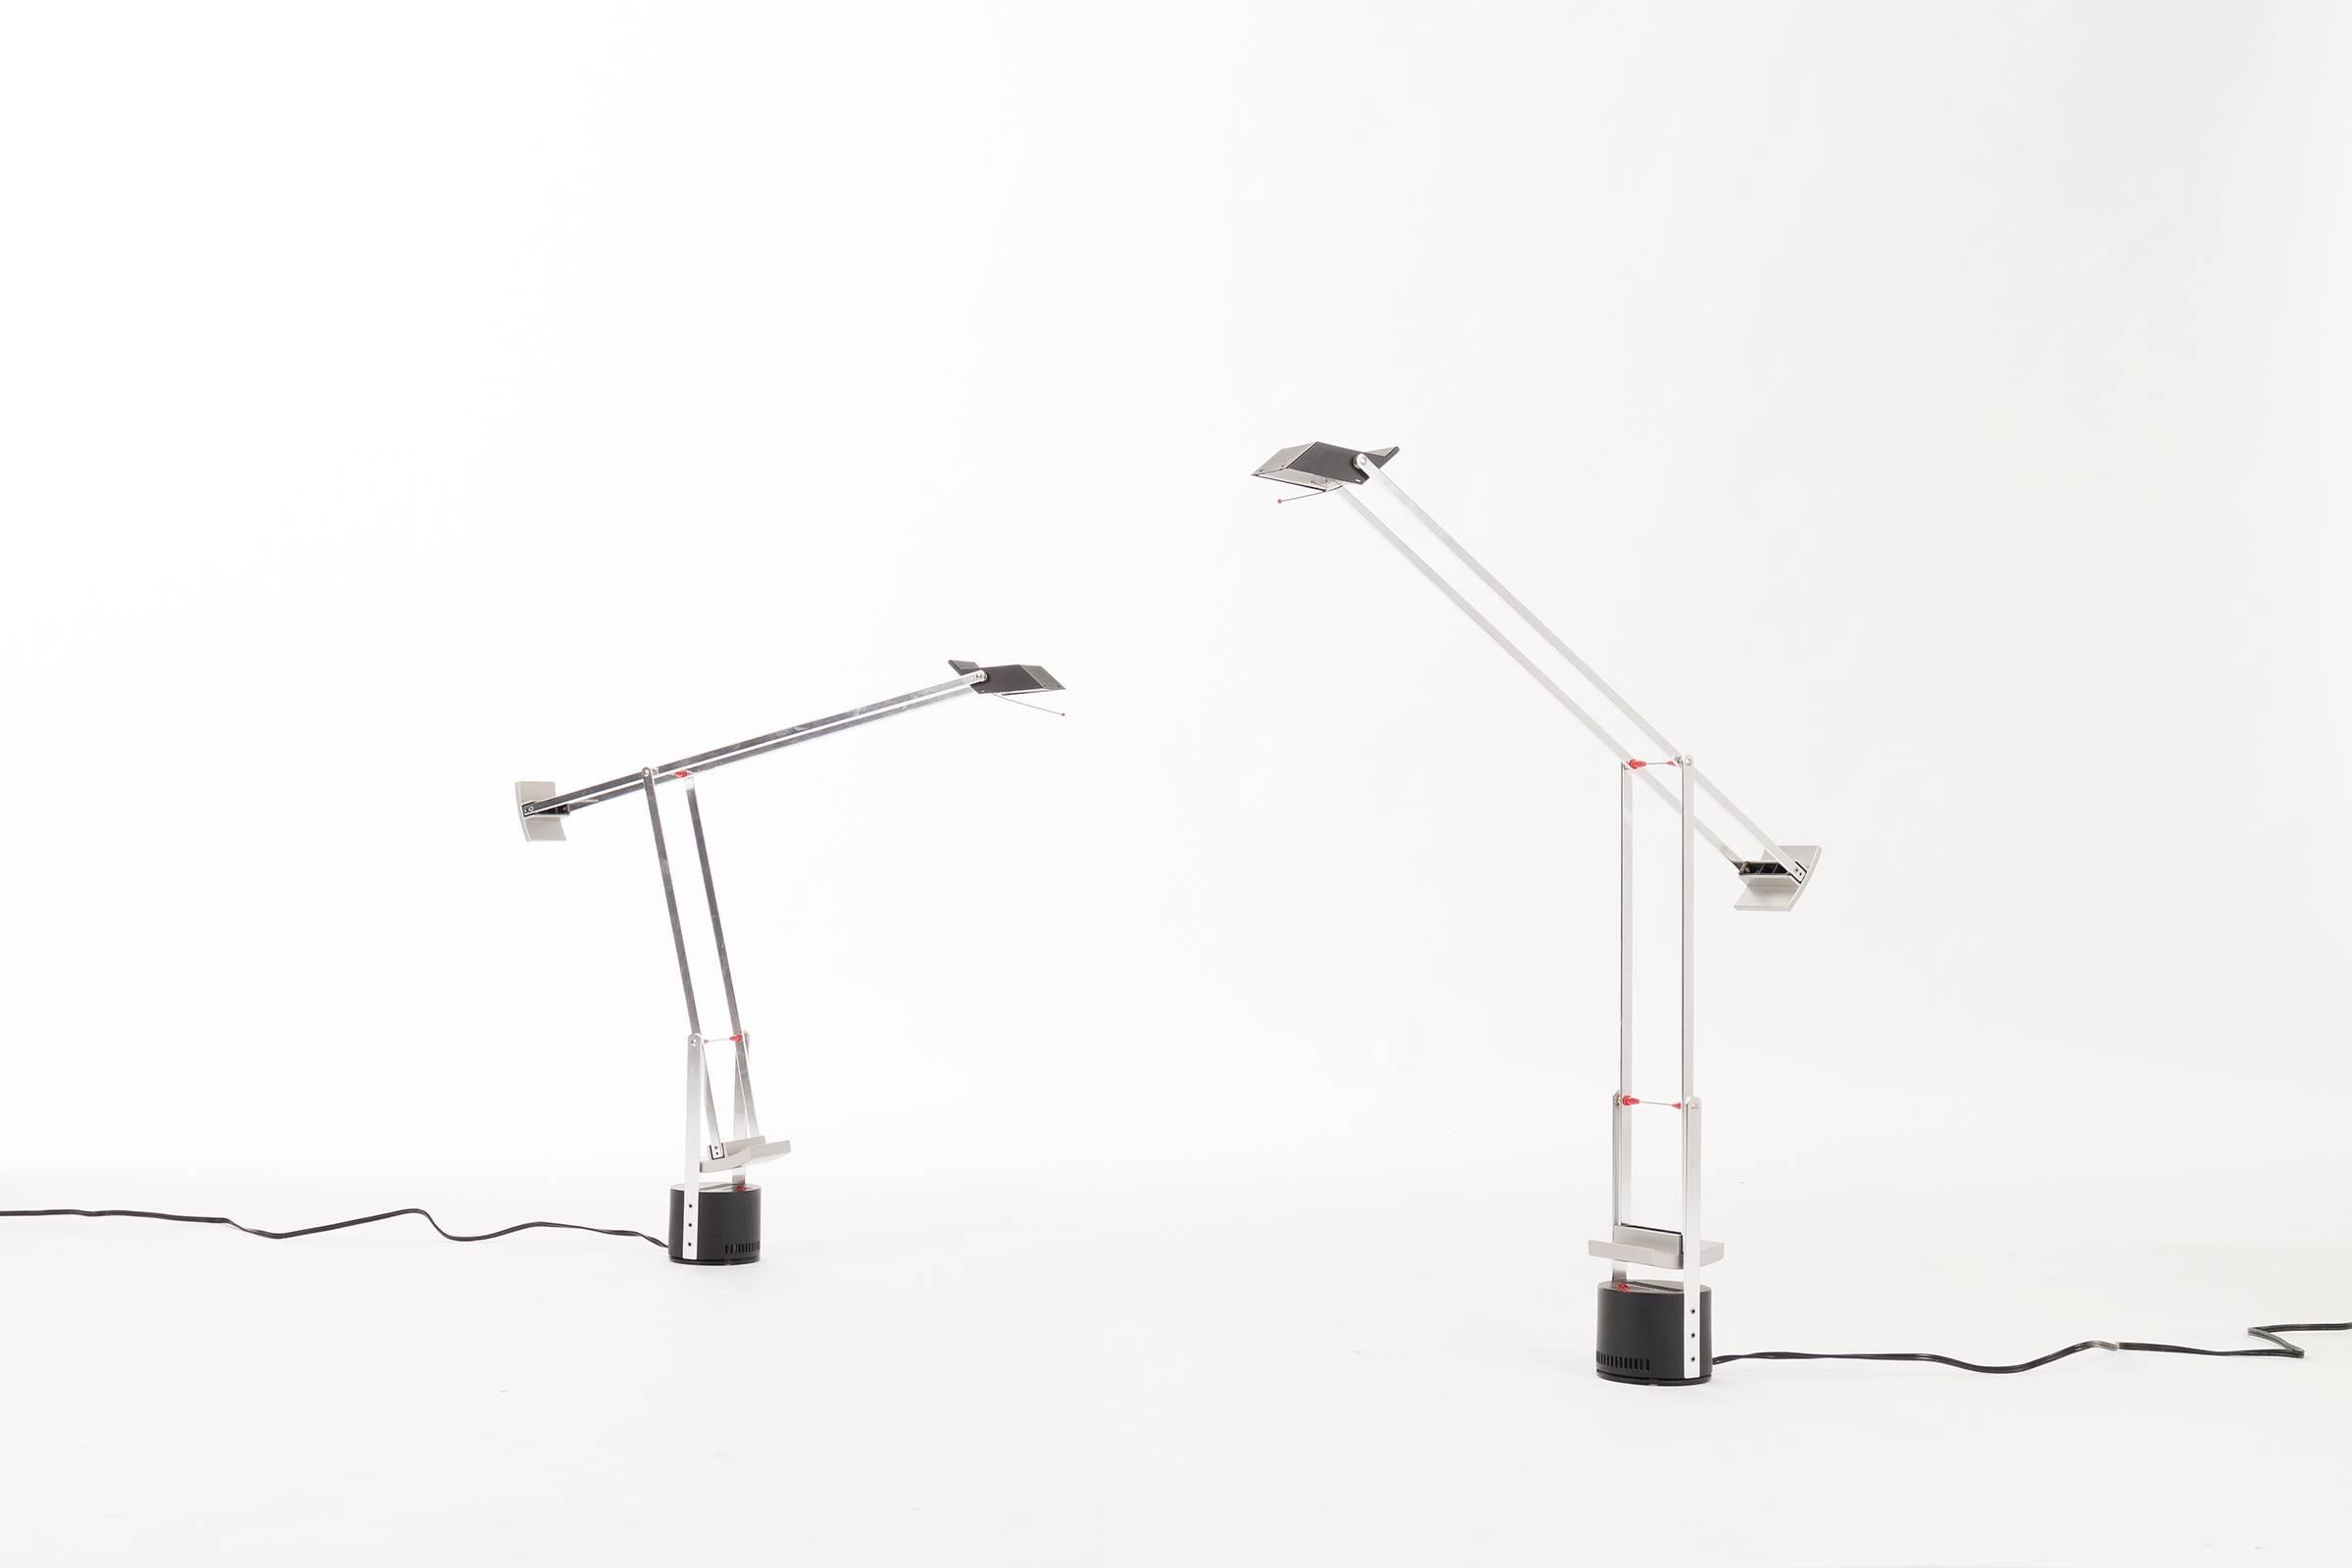 Pair of chrome-plated Tizio desk lamps. Metal body with two counterweighted arms for easy configuration. Halogen bulb.